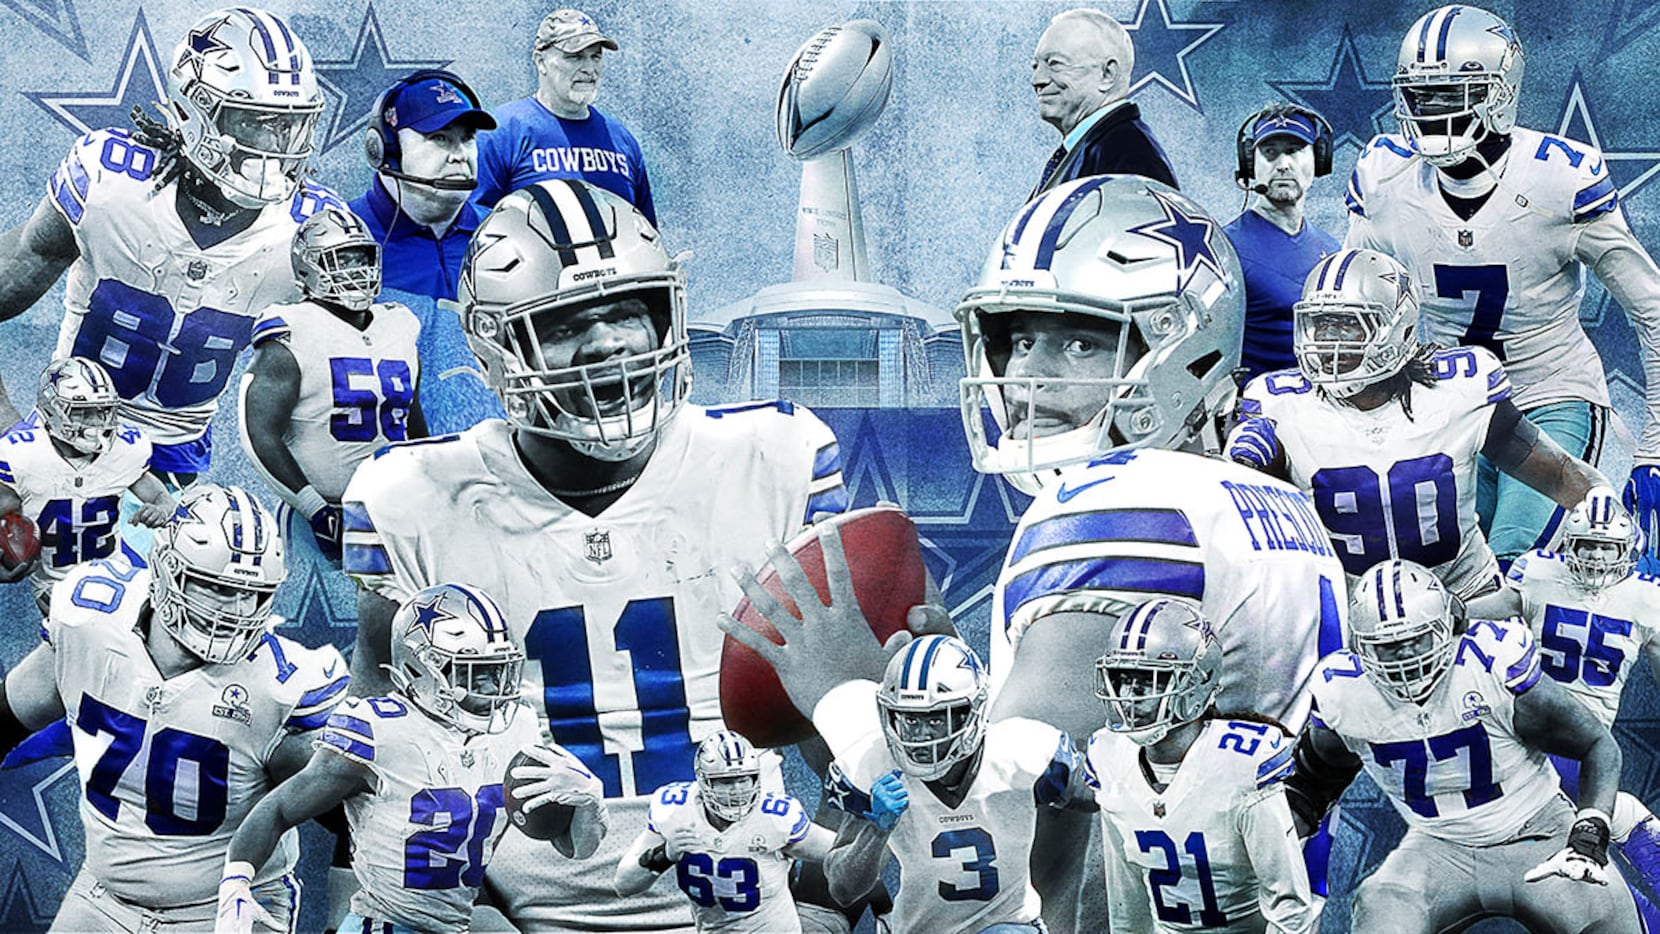 Giants & Cowboys Meet Under the Lights of SNF, Dallas Cowboys, New York  Giants, NFC East, National Football Conference, NBC Sunday Night Football